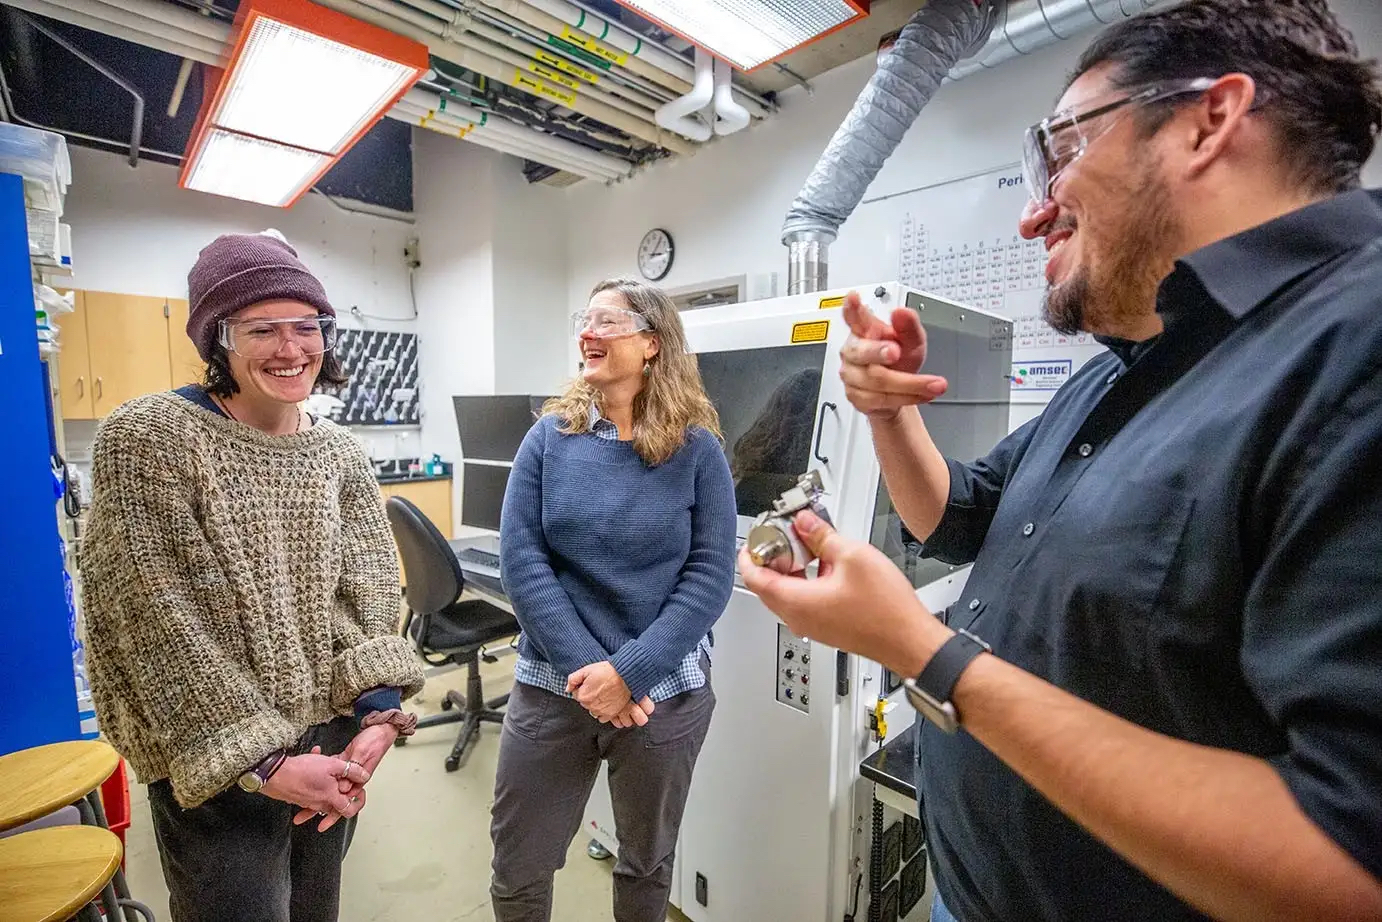 Western Washington University grad student Haley Holliday, left, laughs in the lab with faculty mentors Kathryn Sobocinski and Manuel Montano.